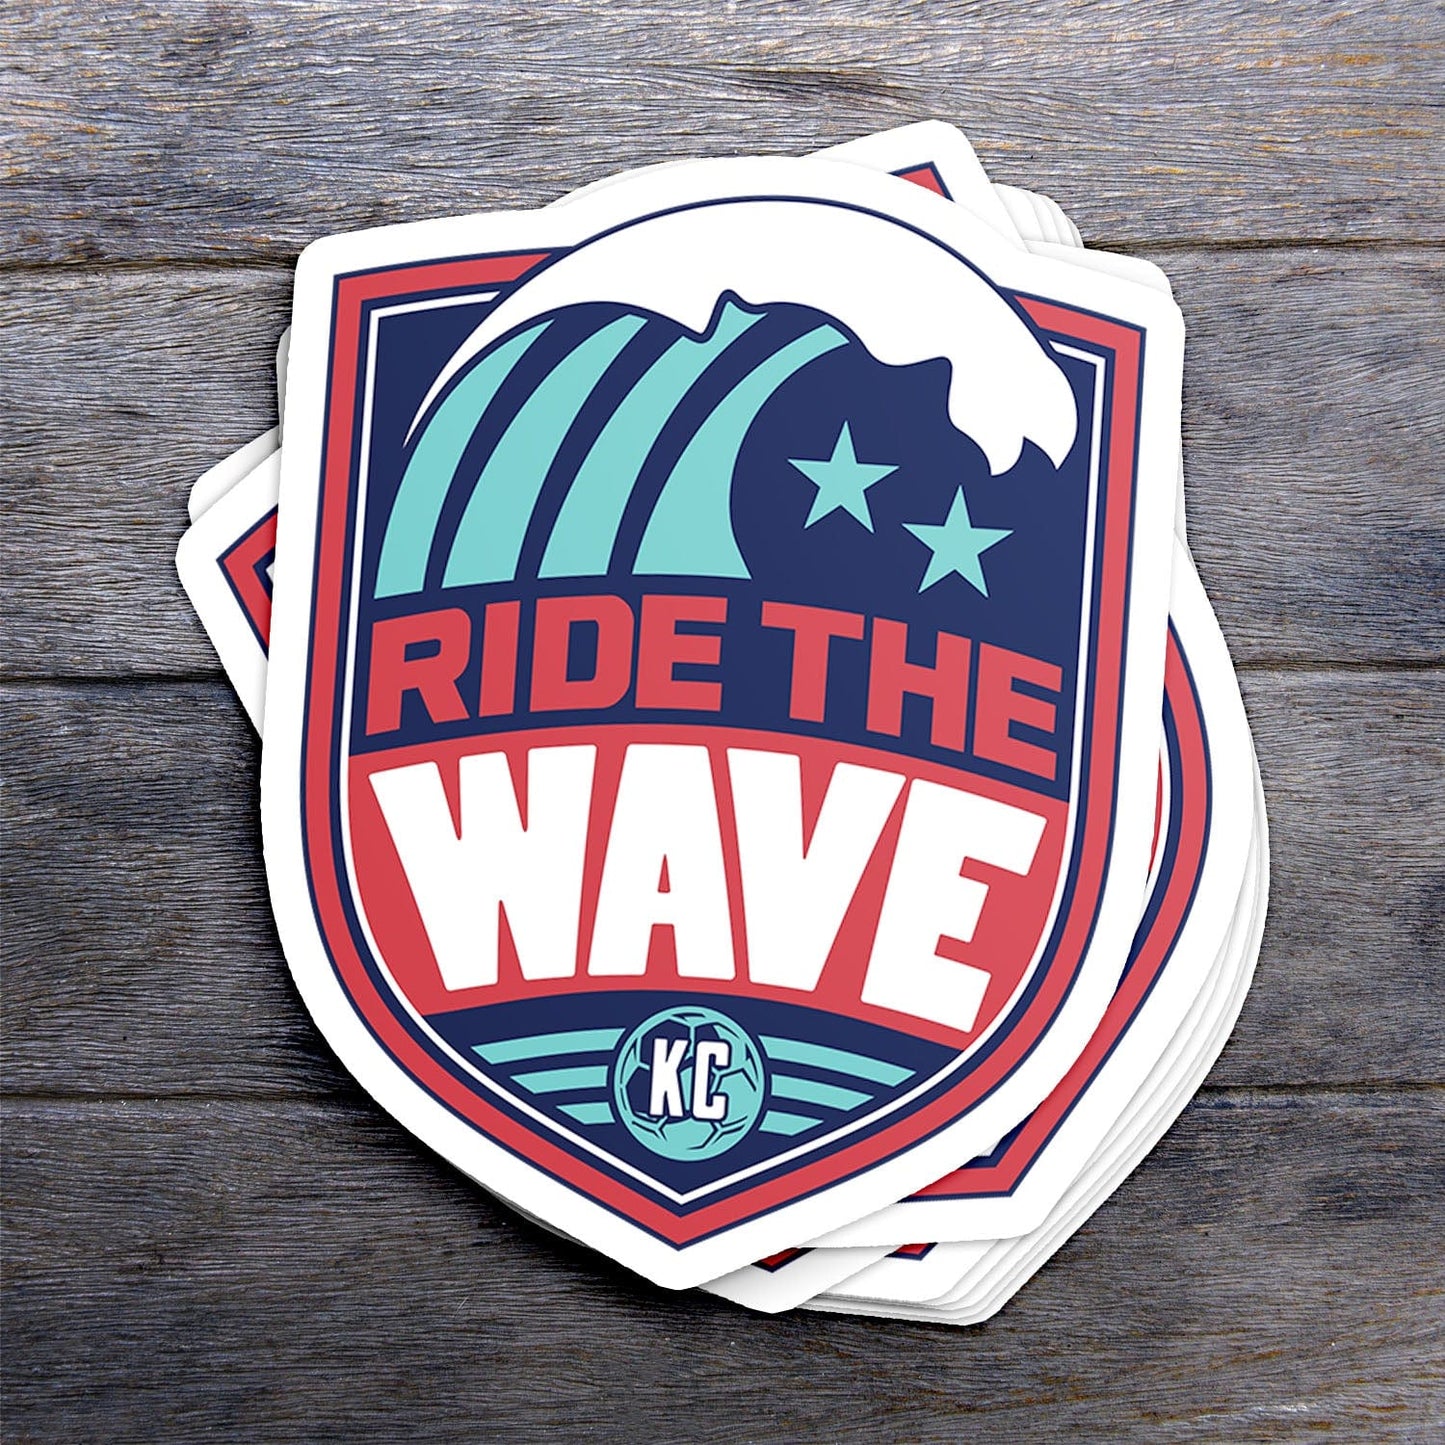 KC Swag Kansas City Current RIDE THE WAVE die-cut sticker decal made from waterproof vinyl stack on dark wood table